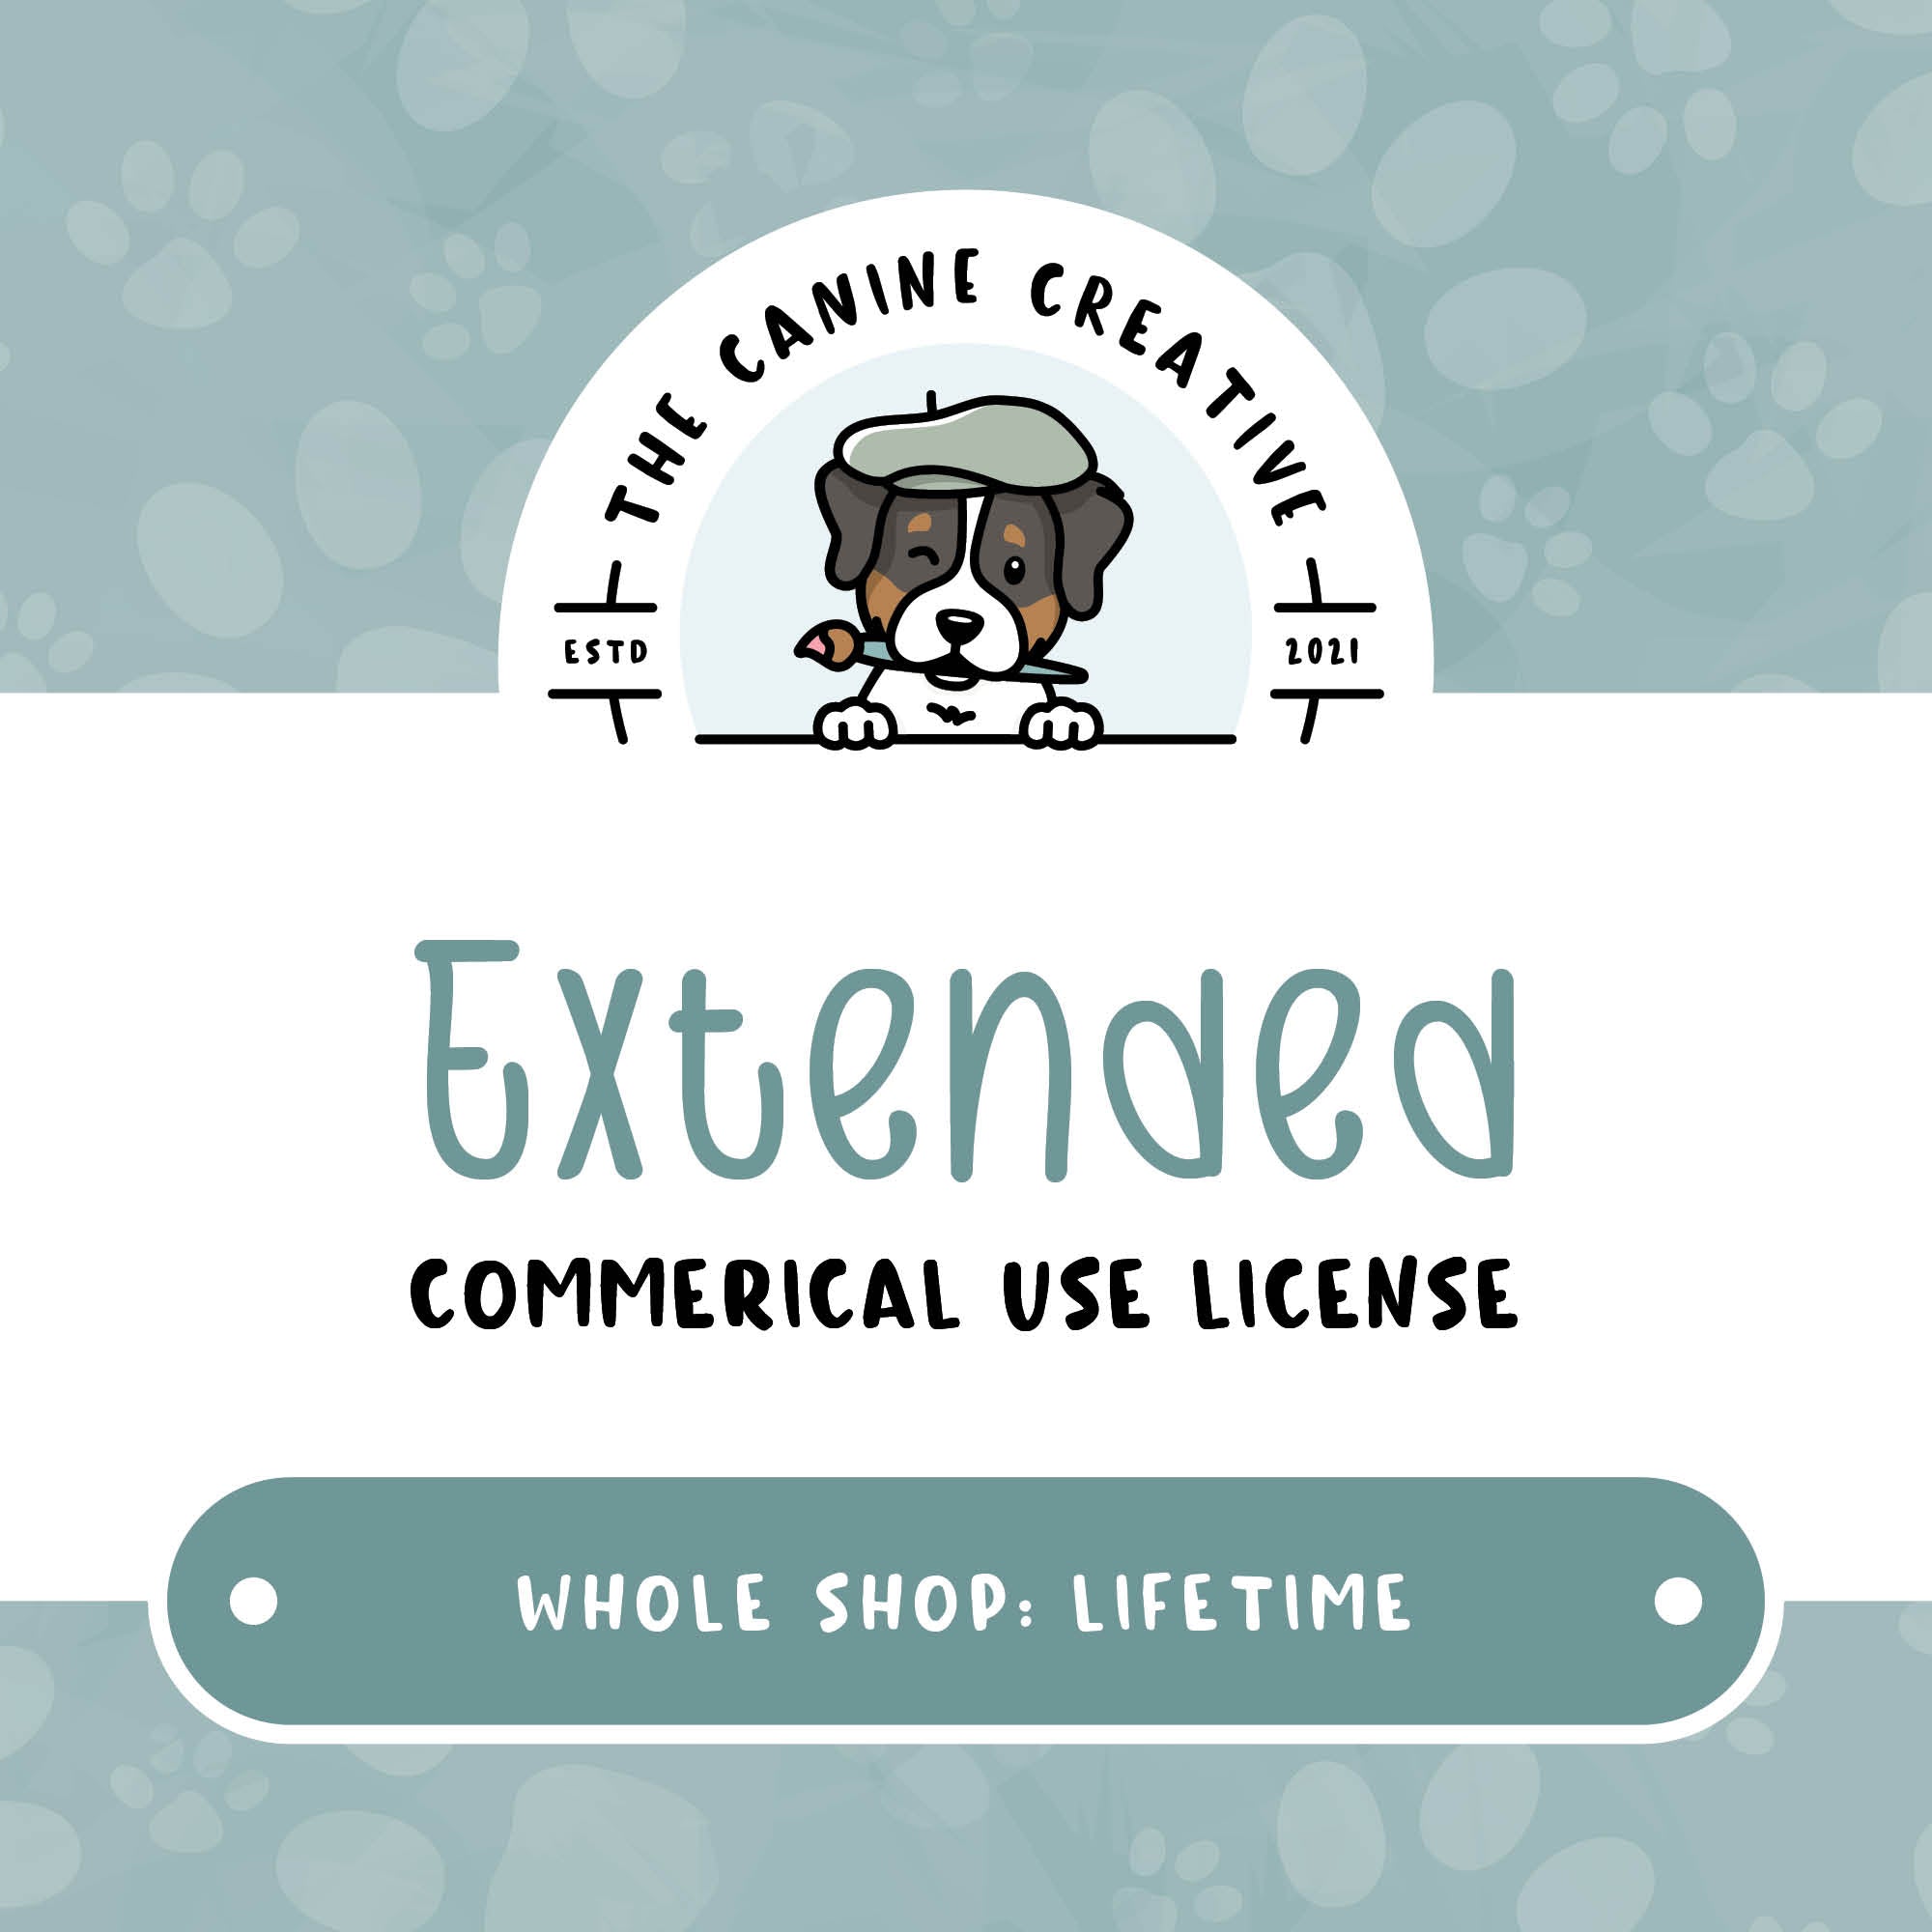 Extended Commercial Use License - Whole Shop: Lifetime